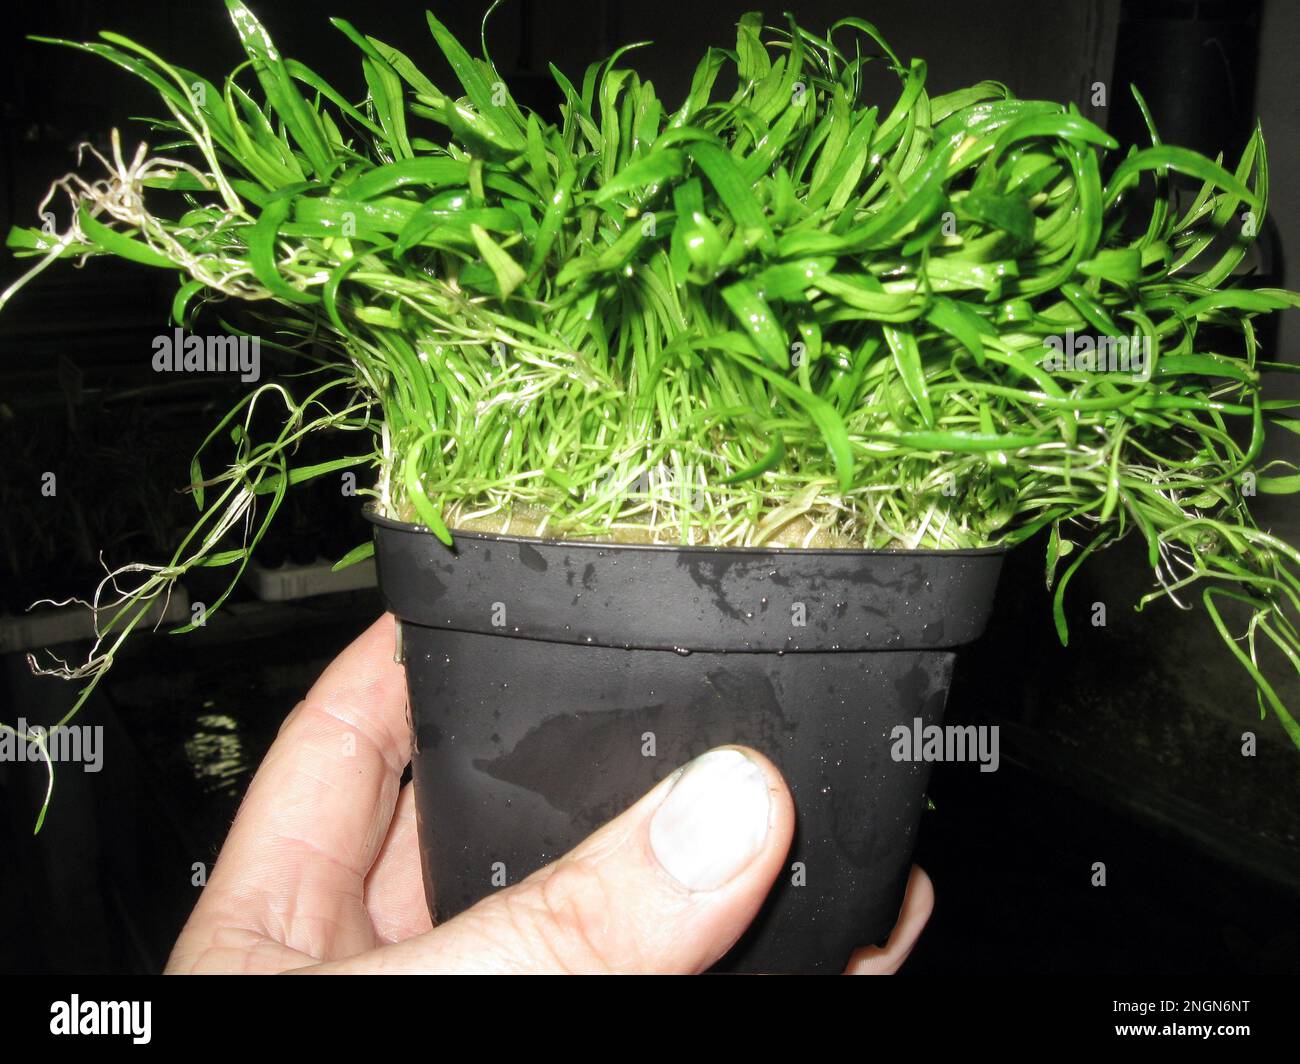 Micro sword (Lilaeopsis brasiliensis) is a plant species in the family Apiaceae. Stock Photo